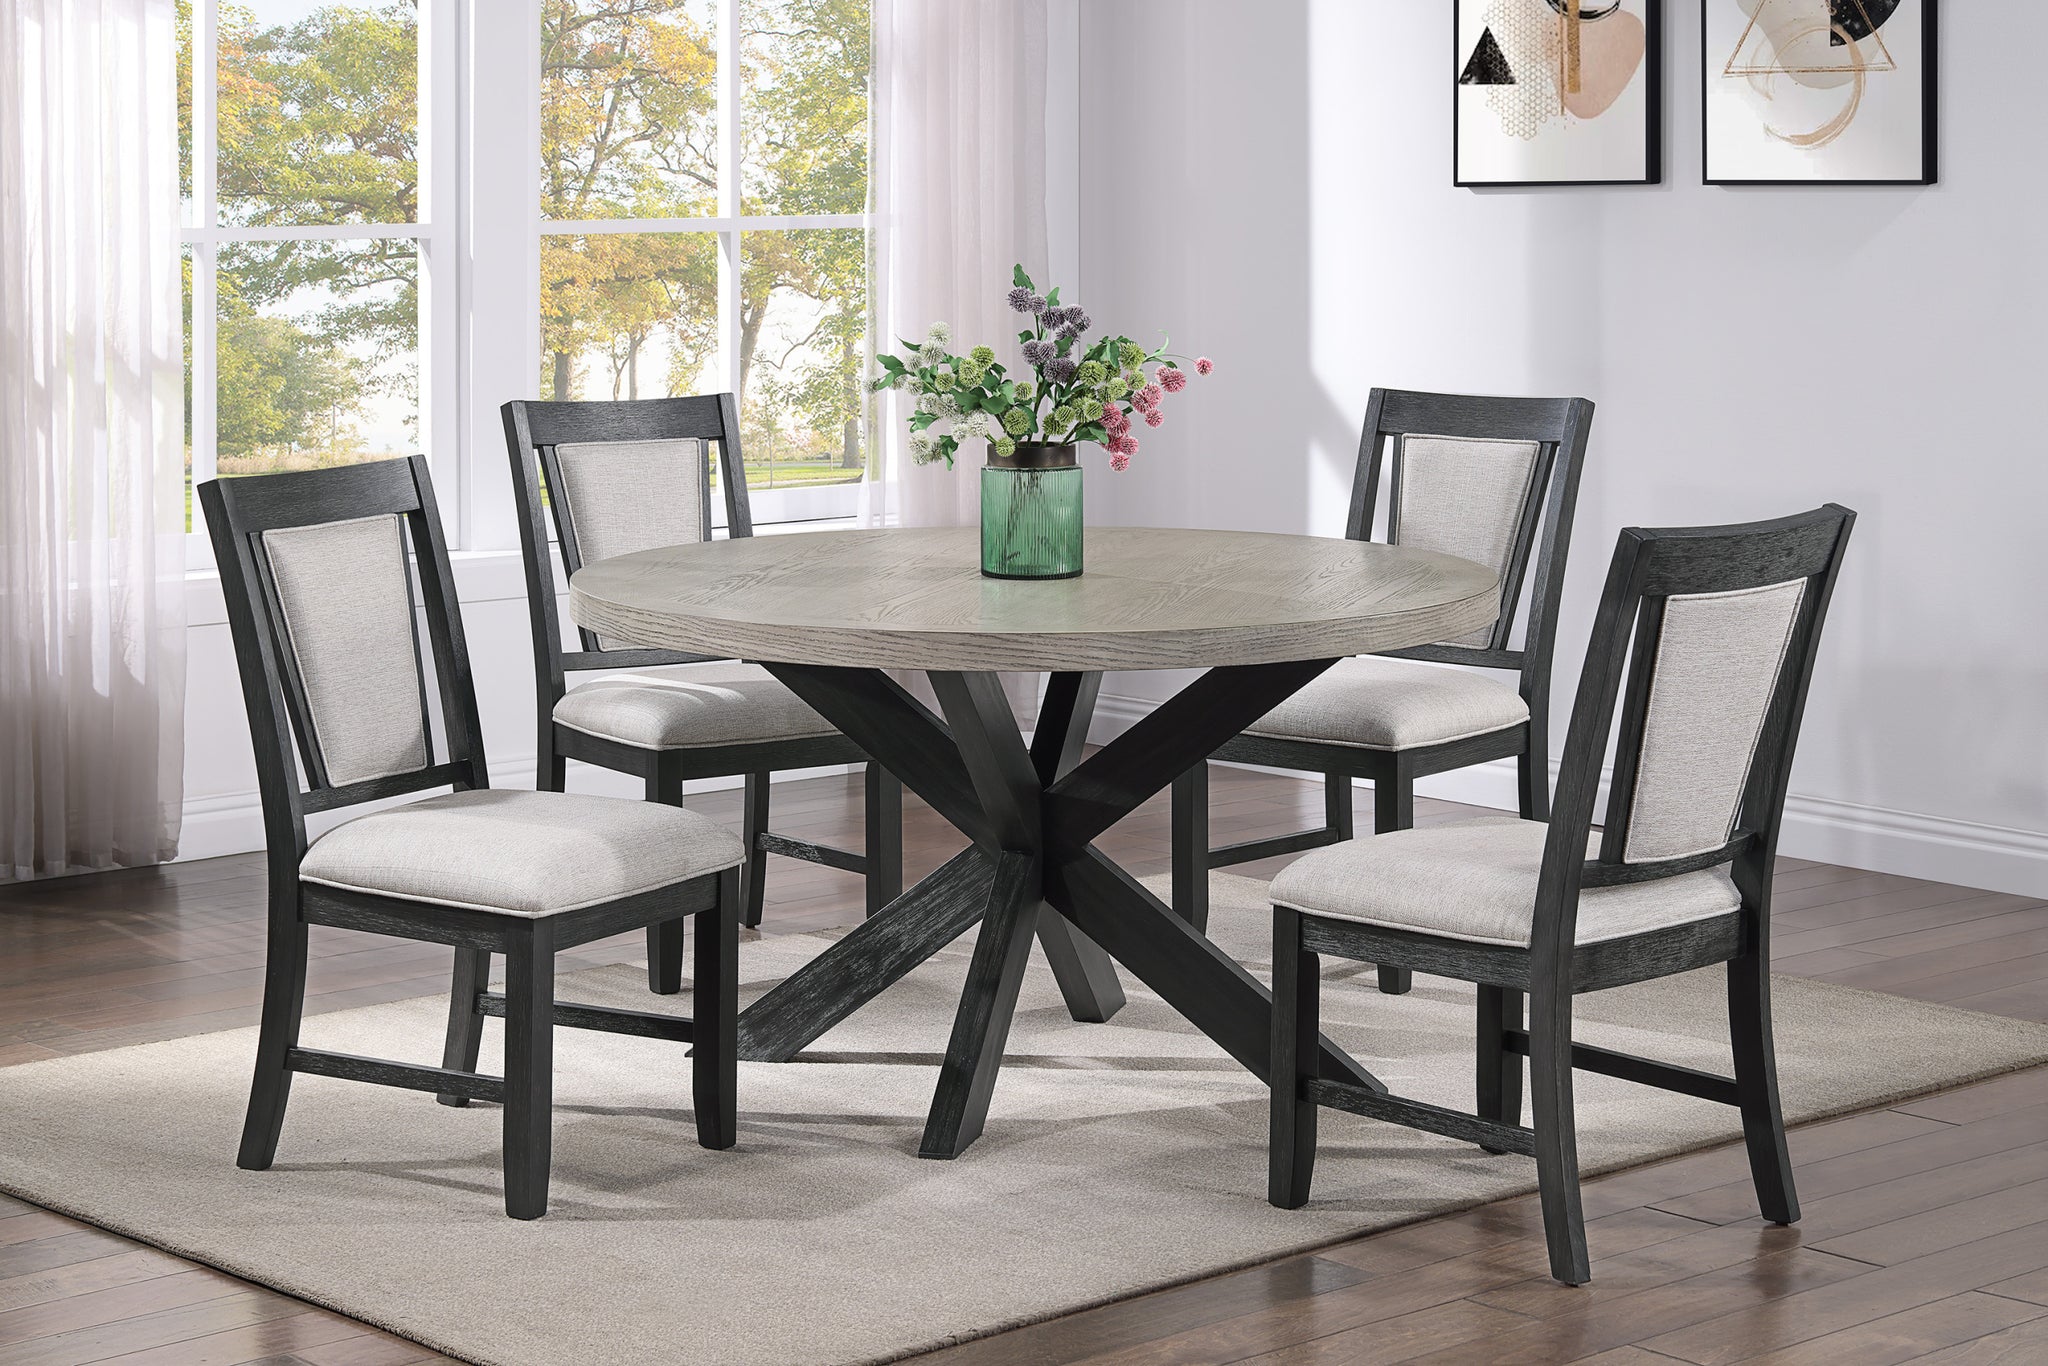 2pc Contemporary Dining Side Chair Upholstered